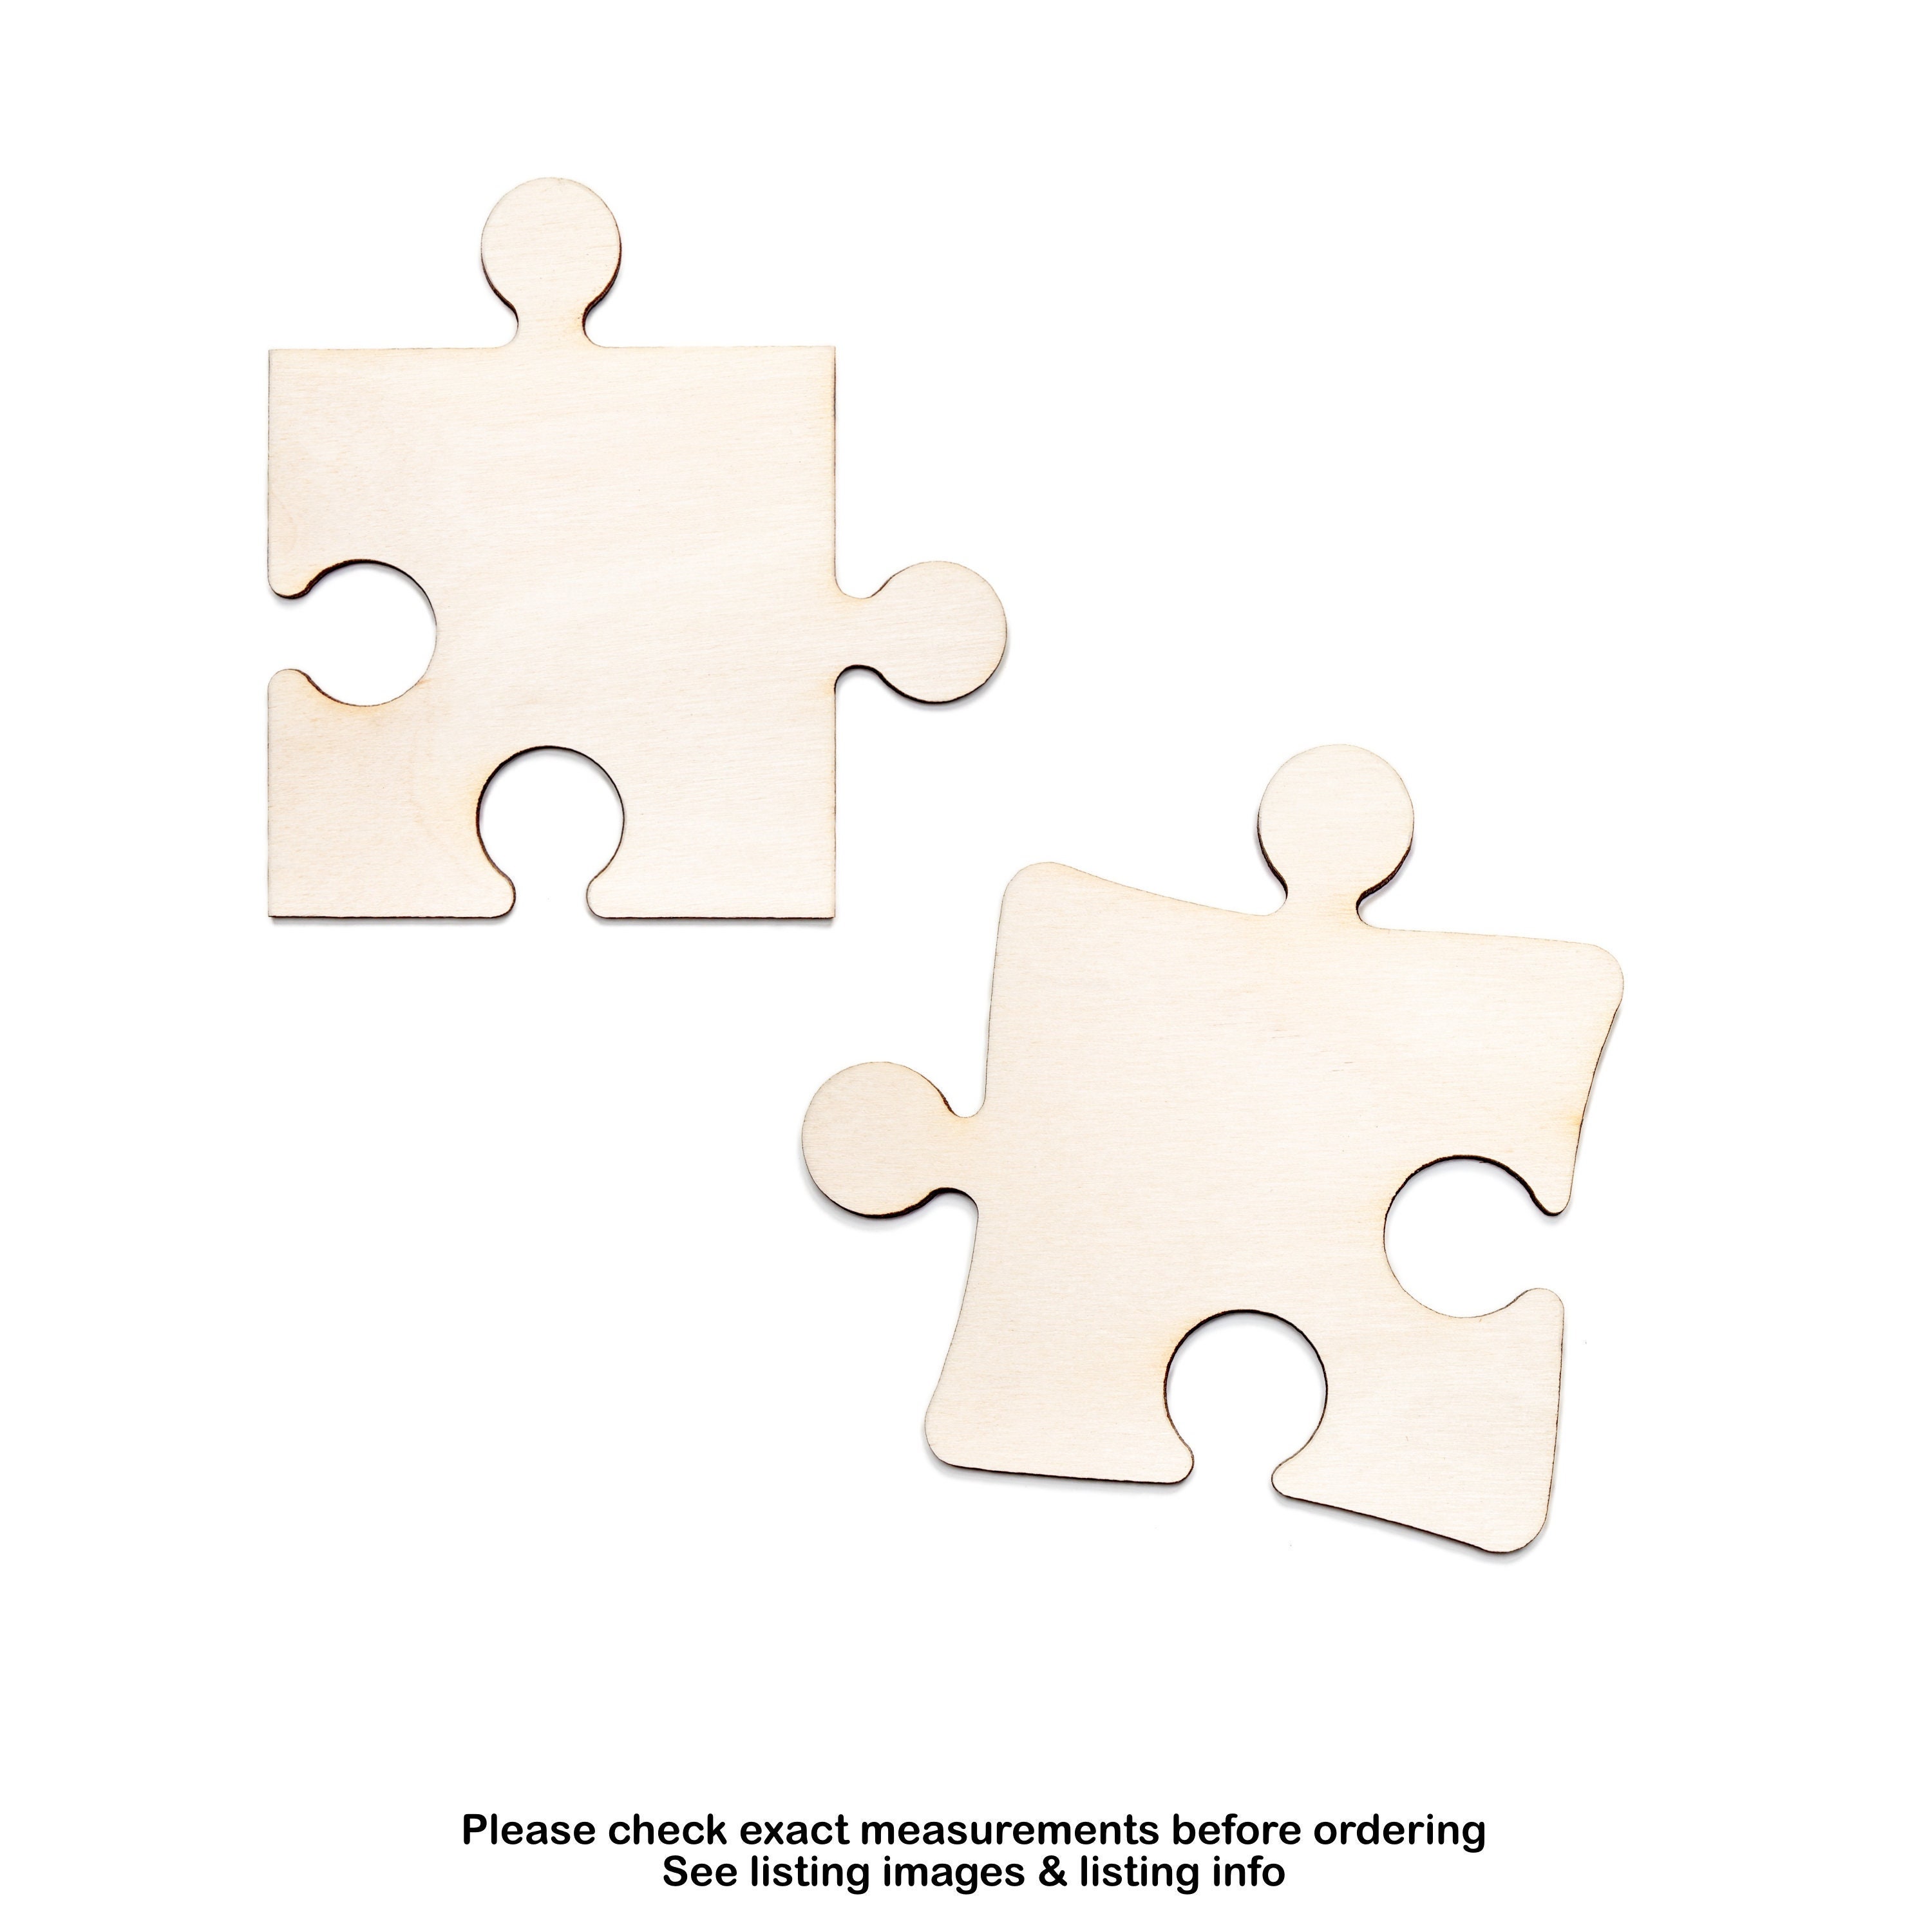 UPlama 300pcs Blank Puzzles, Freeform Blank Puzzle Pieces Blank Wooden Puzzles DIY Jigsaw Puzzles Plain Puzzle Pieces for Crafts, Arts, Card Making